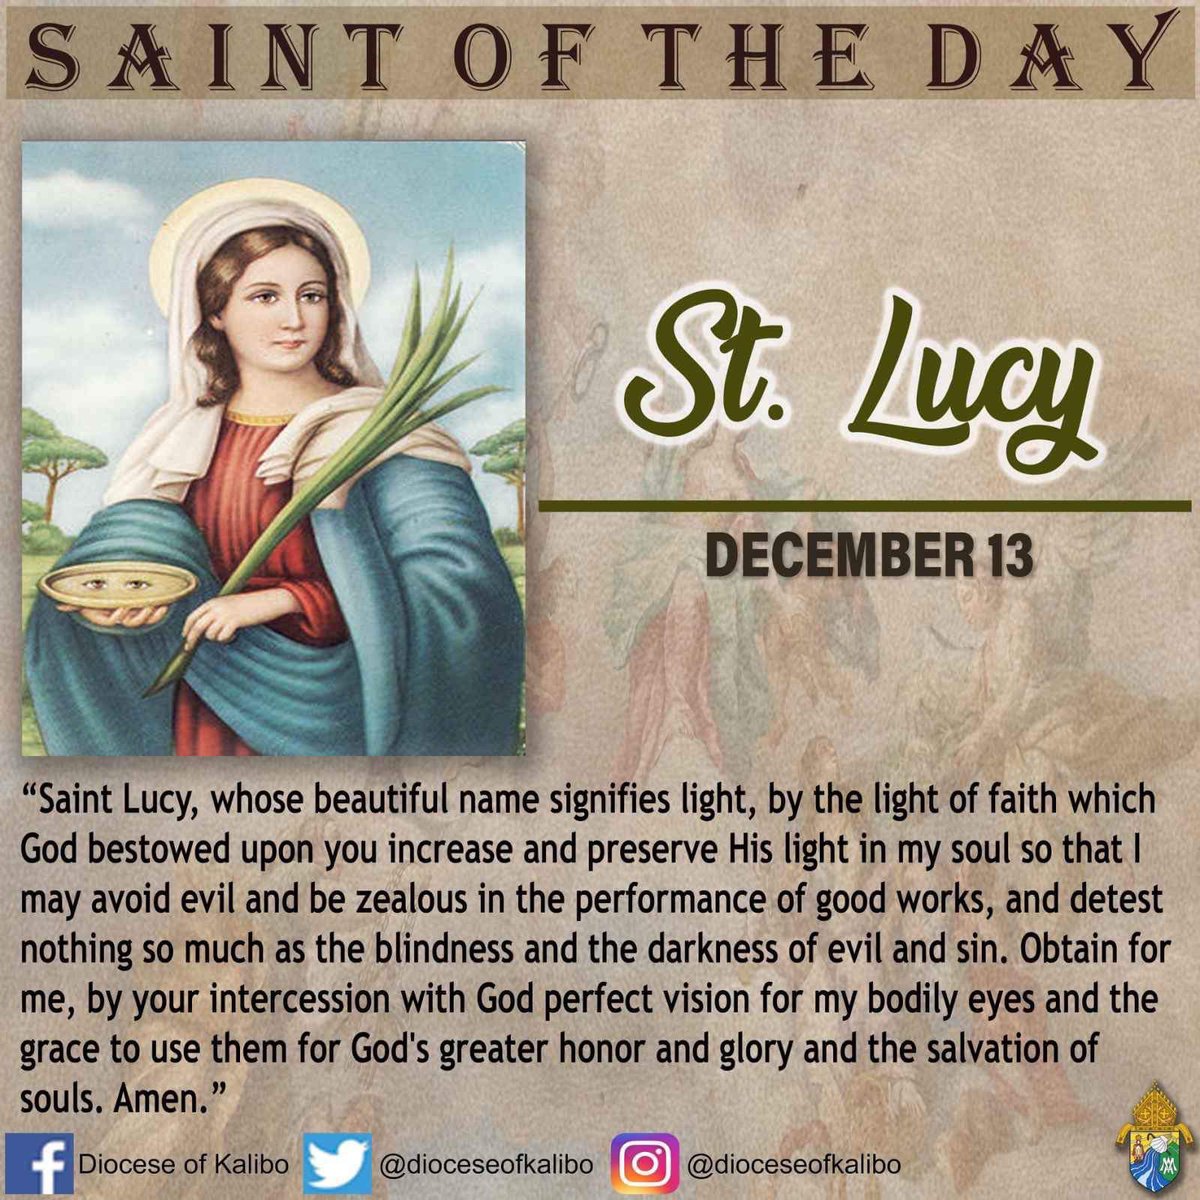 SAINT OF THE DAY

December 13 | St. Lucy
 
St. Lucy, pray for us! 🙏🏻
 
#SaintOfTheDay #SaintLucy #December13 #Socom #DioceseOfKalibo